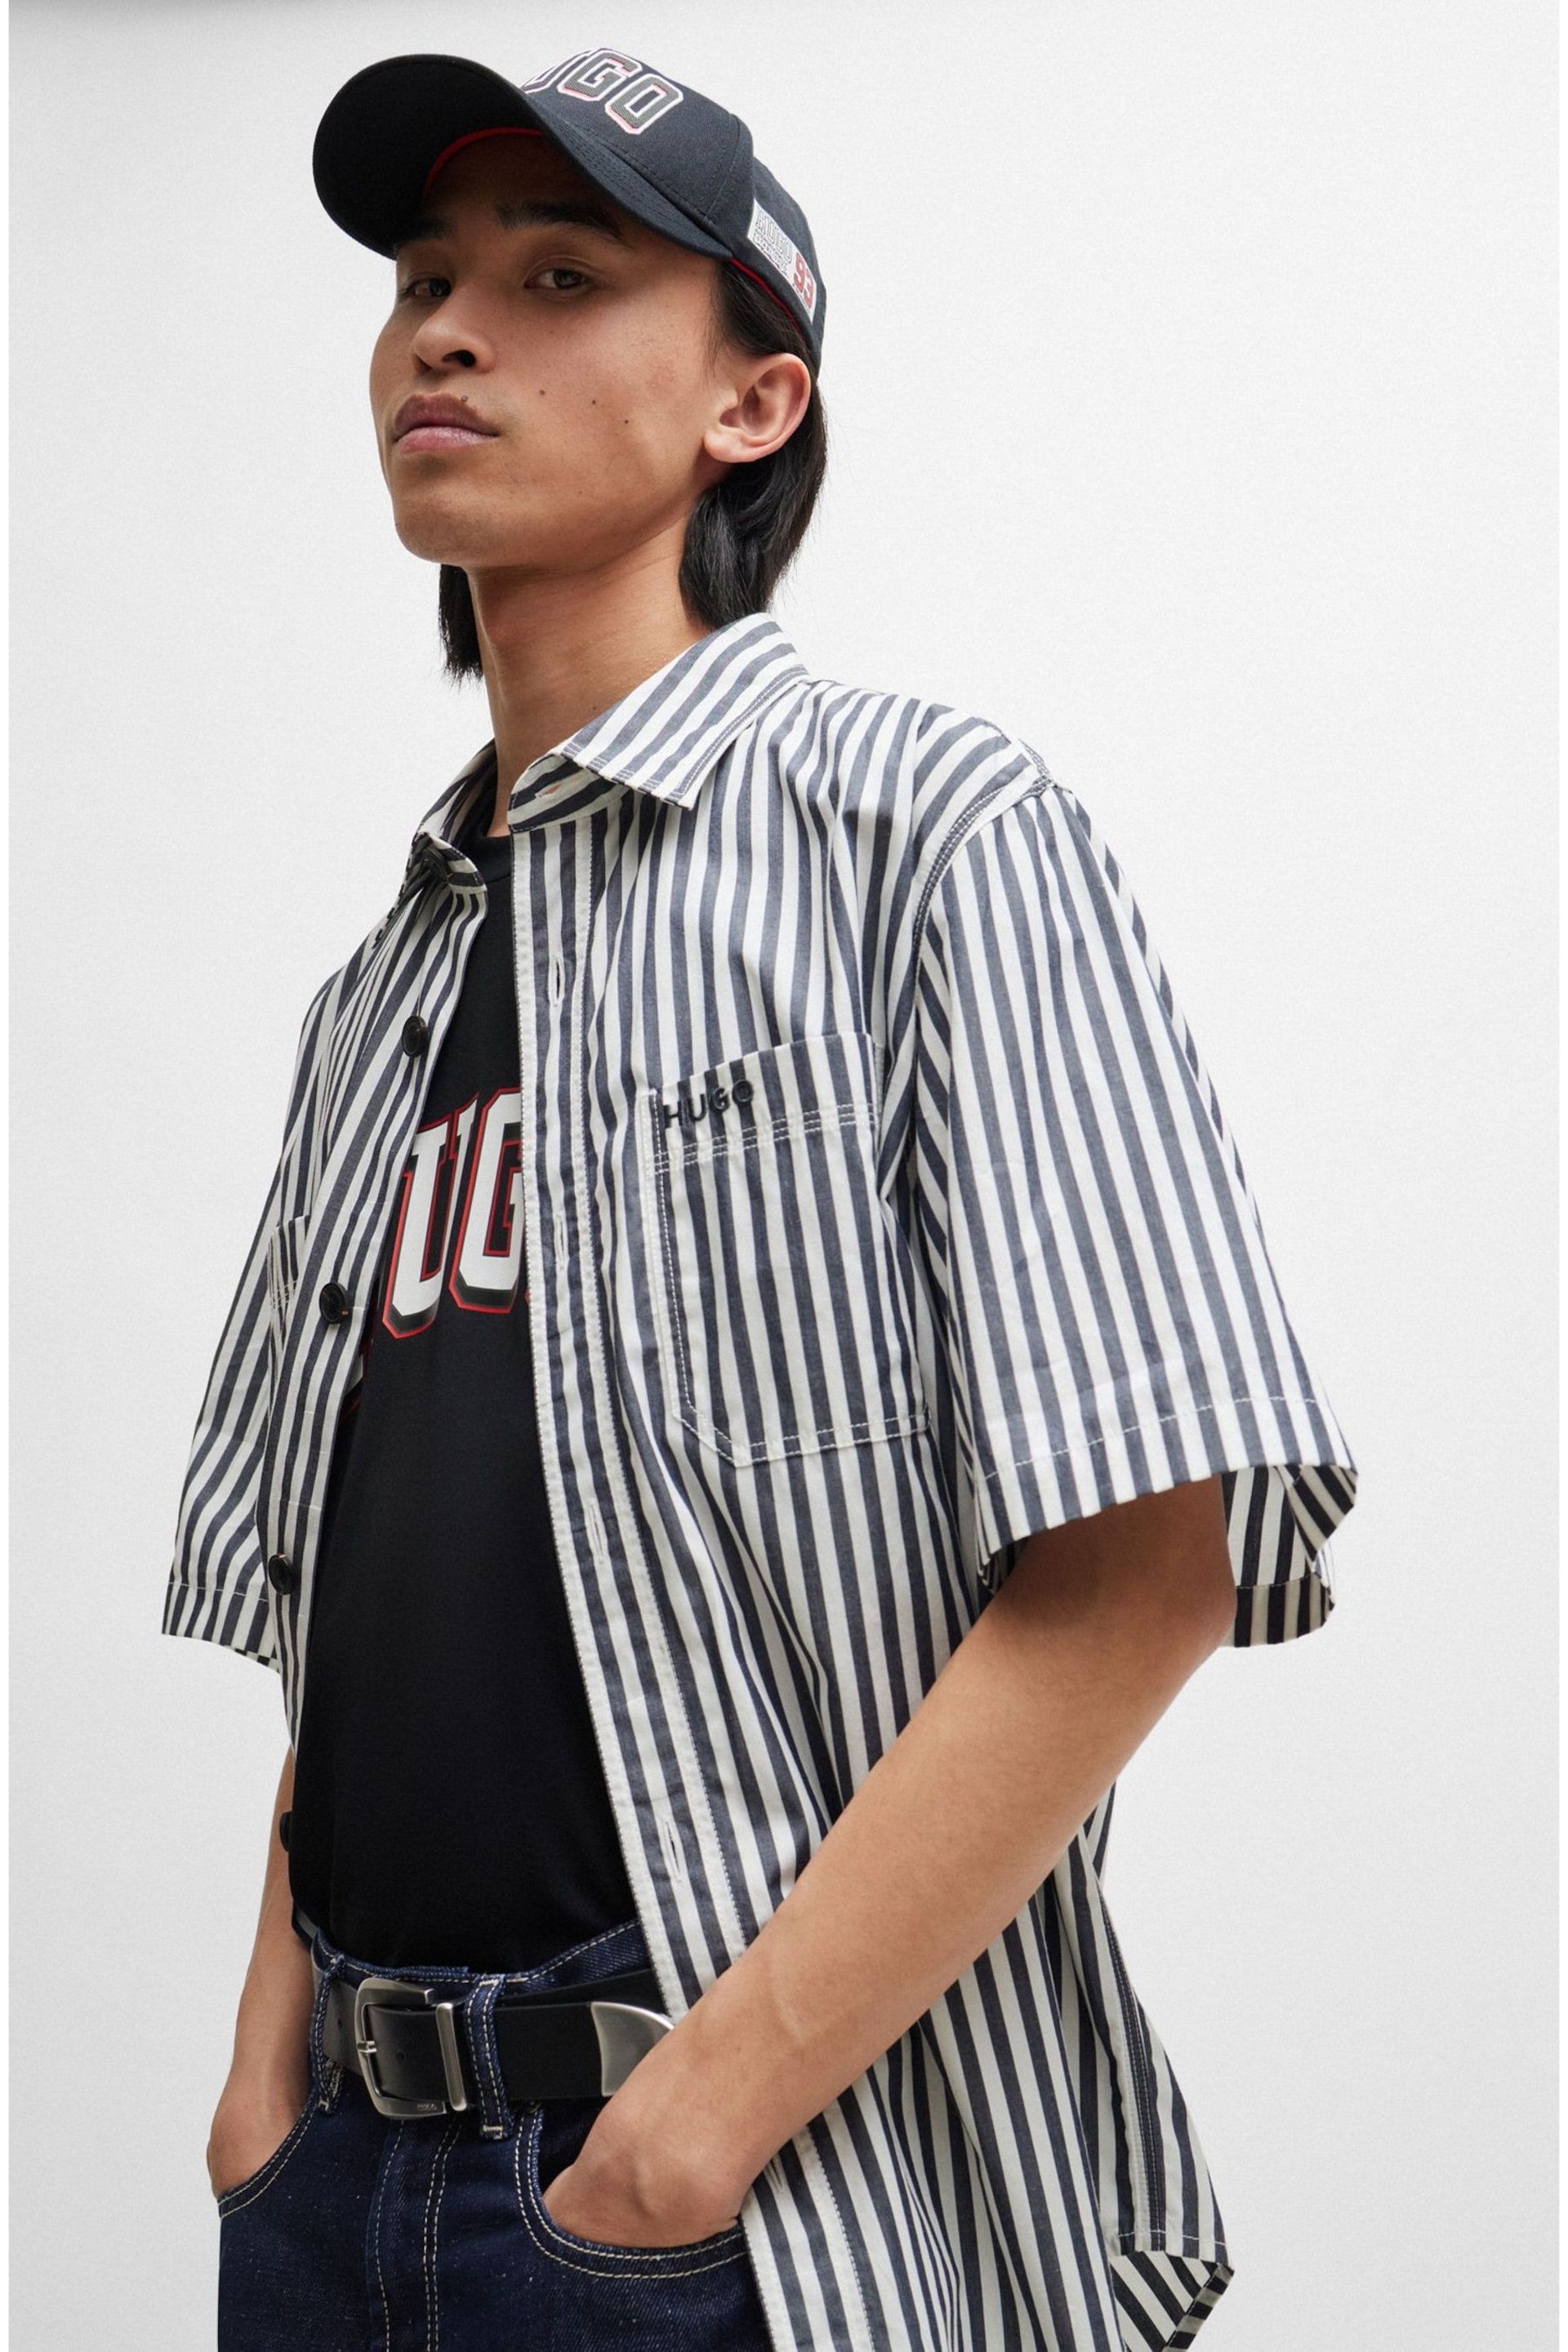 HUGO Oversized Fit Blue Shirt in Striped Cotton Chambray - Image 4 of 6